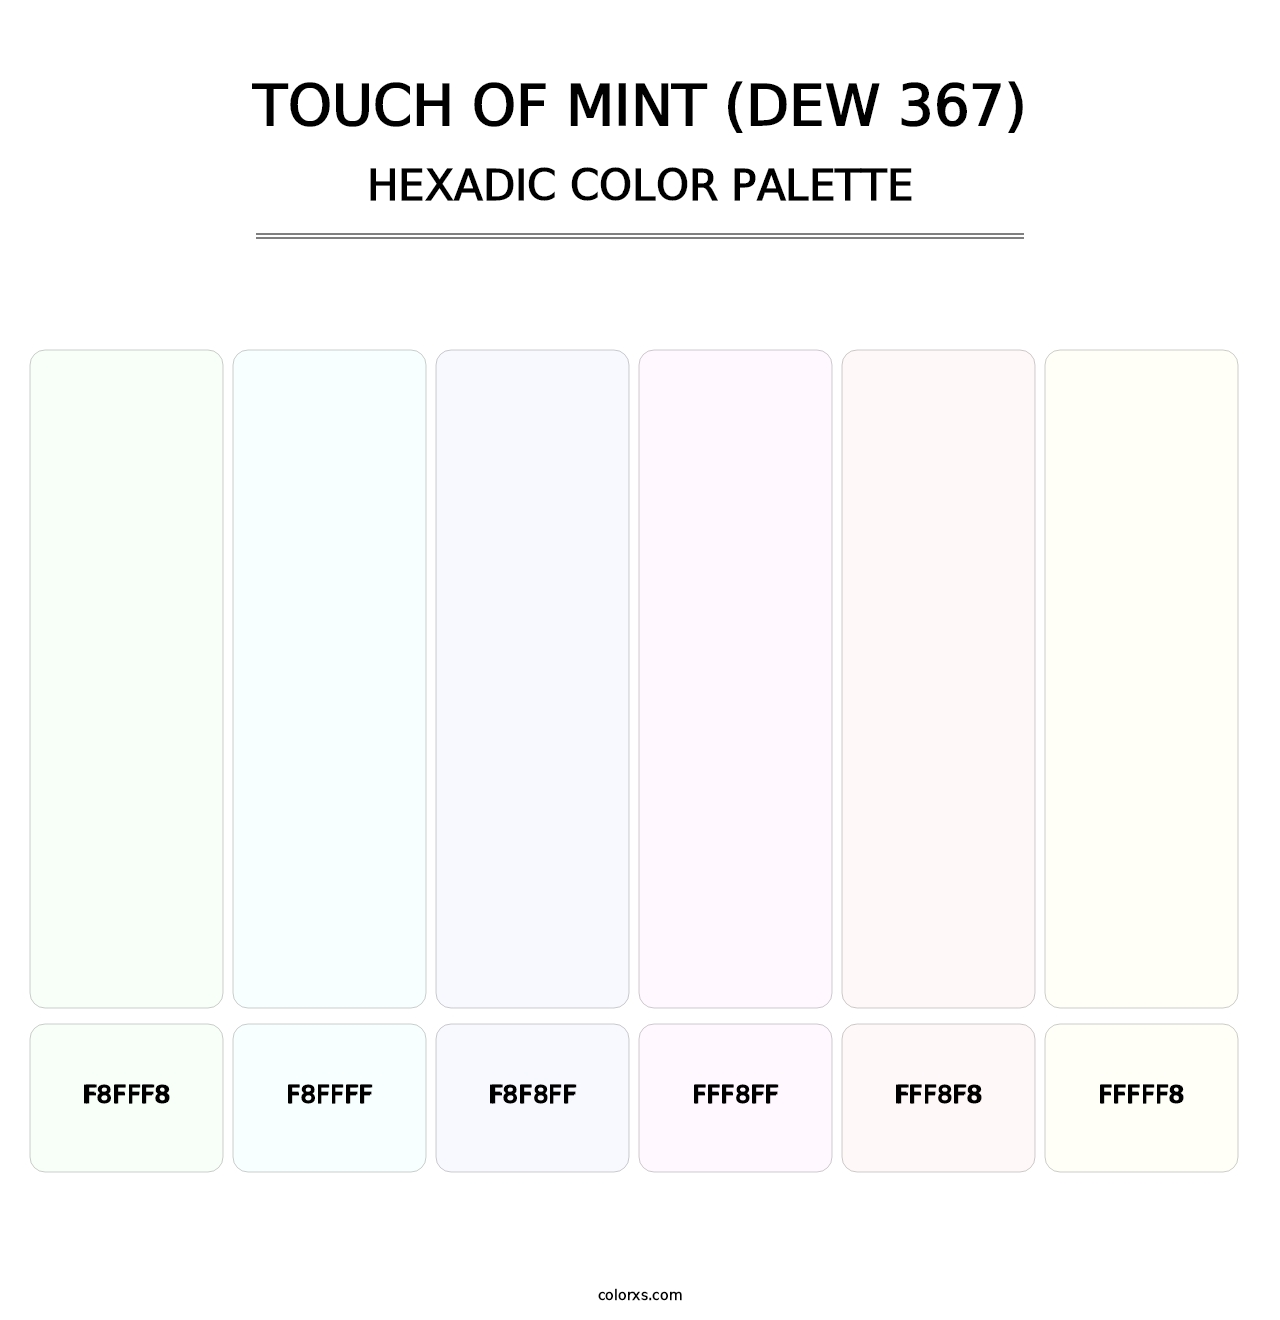 Touch of Mint (DEW 367) - Hexadic Color Palette